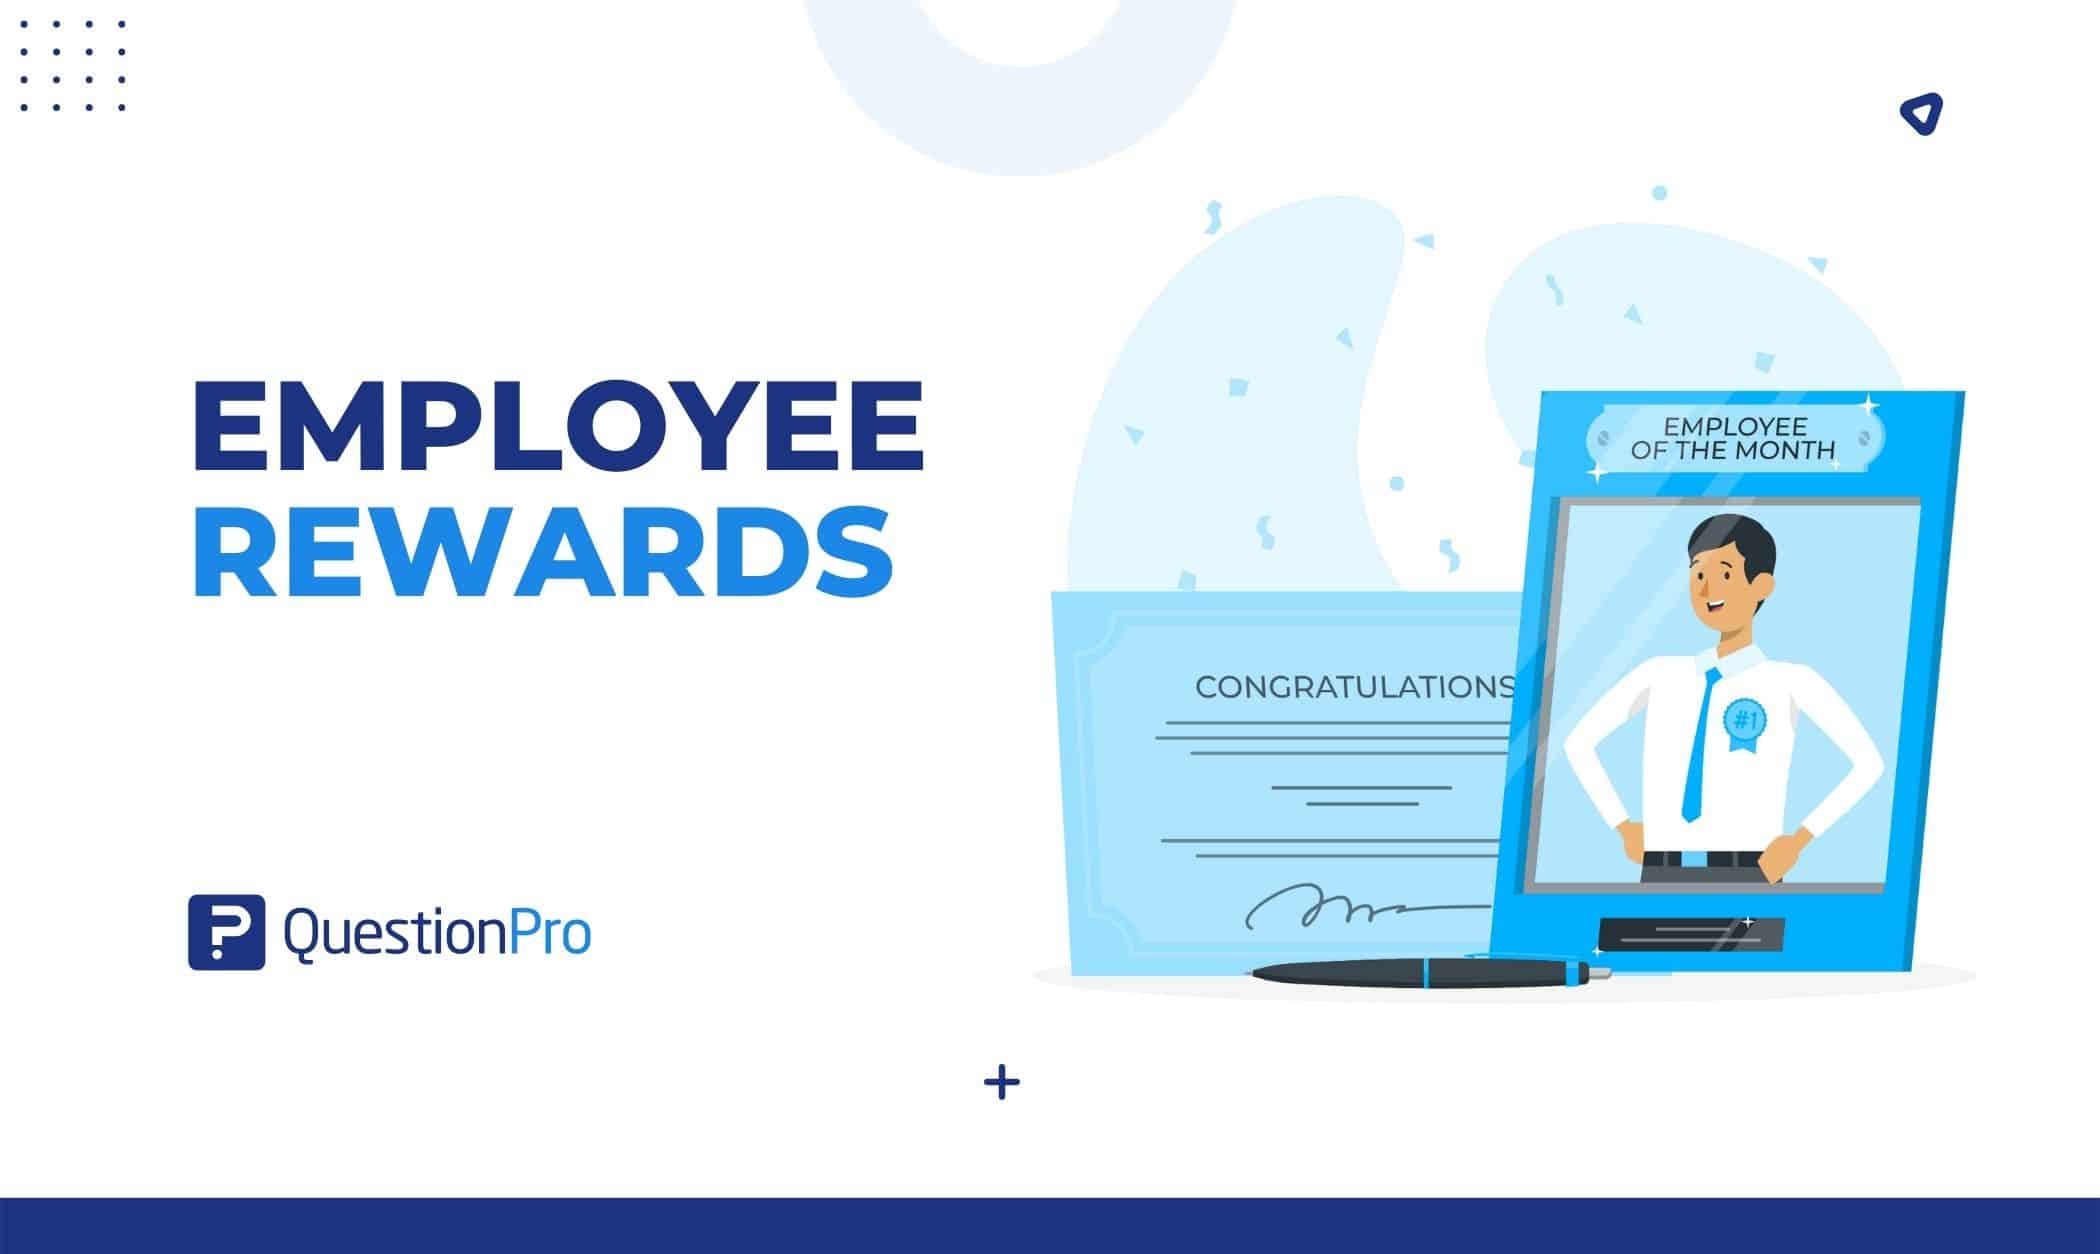 Do you need to show appreciation to your employees? Find 20 Ideas for Employee Rewards that can engage employees and improve workplace culture.